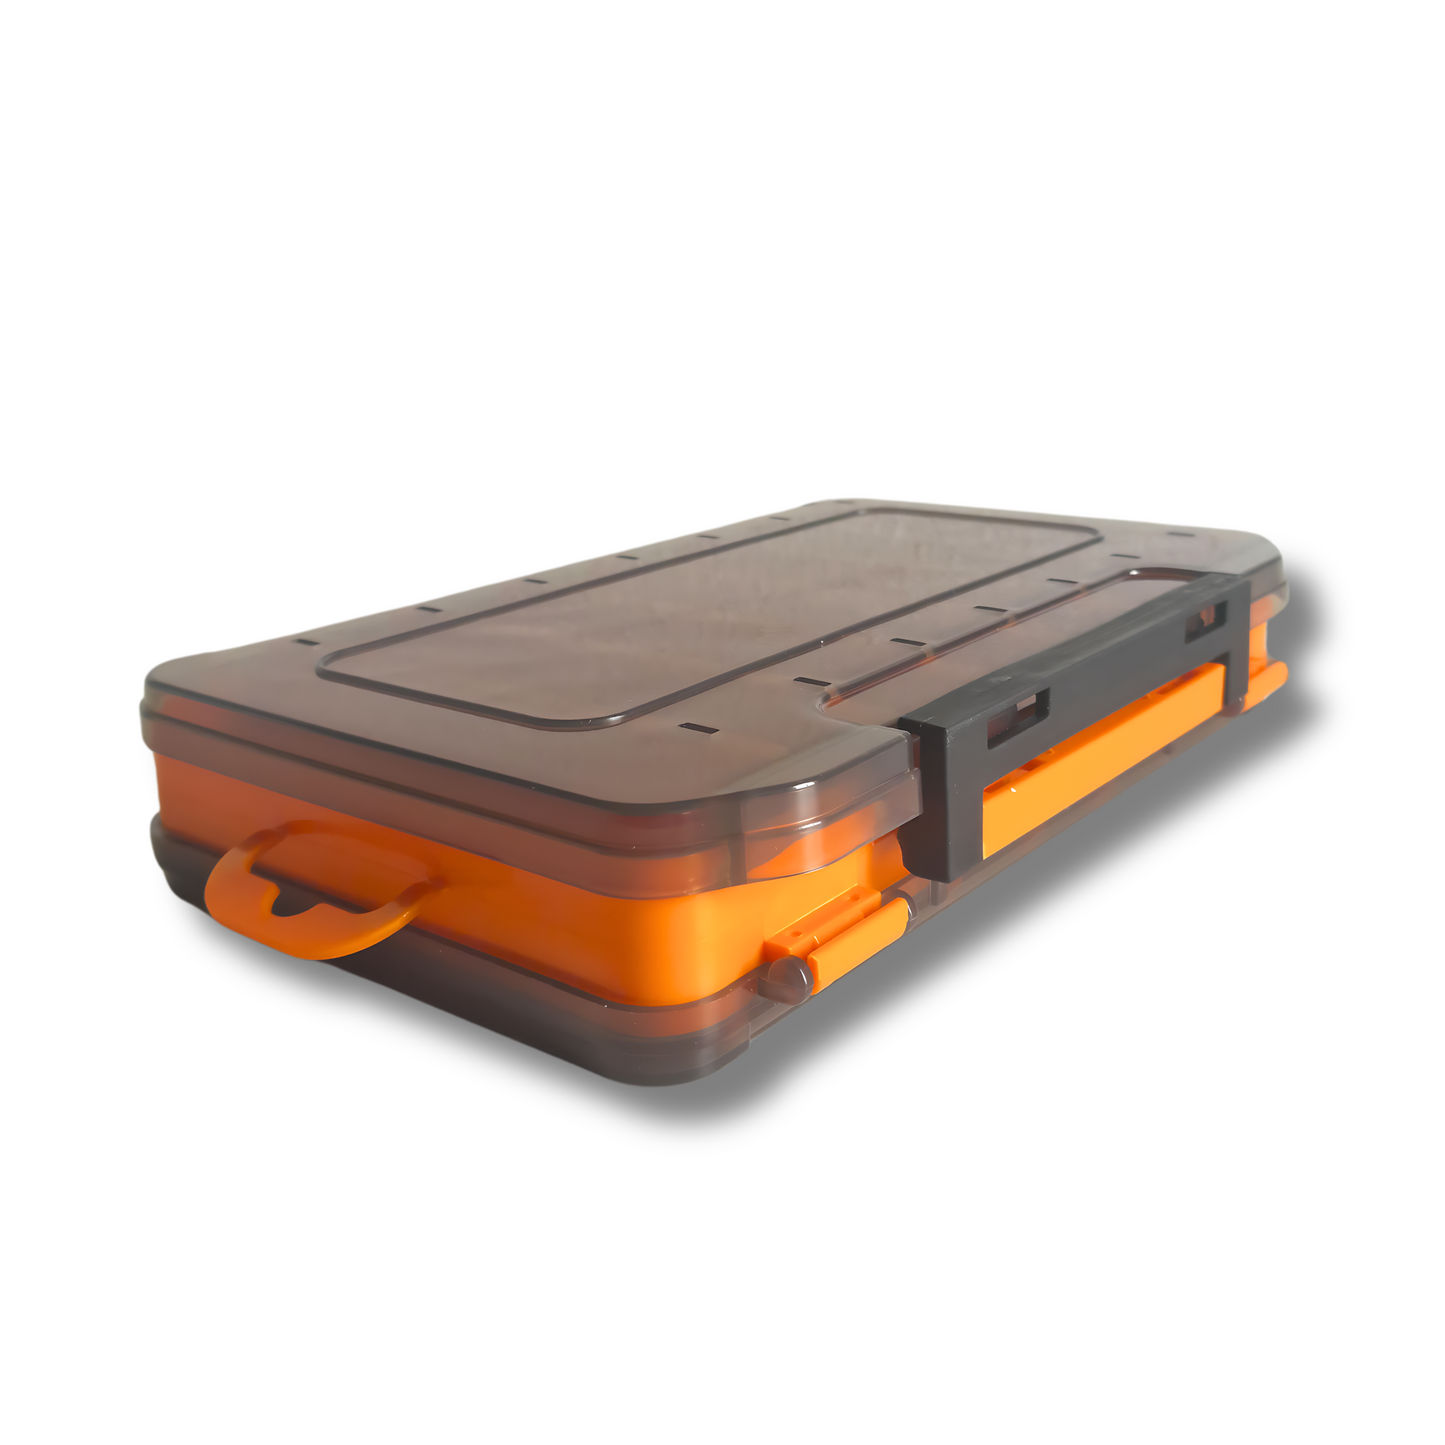 Gobait Fishing Box 198mm x 132mm | 7.8in x 5.2in - 14 Orange Compartments